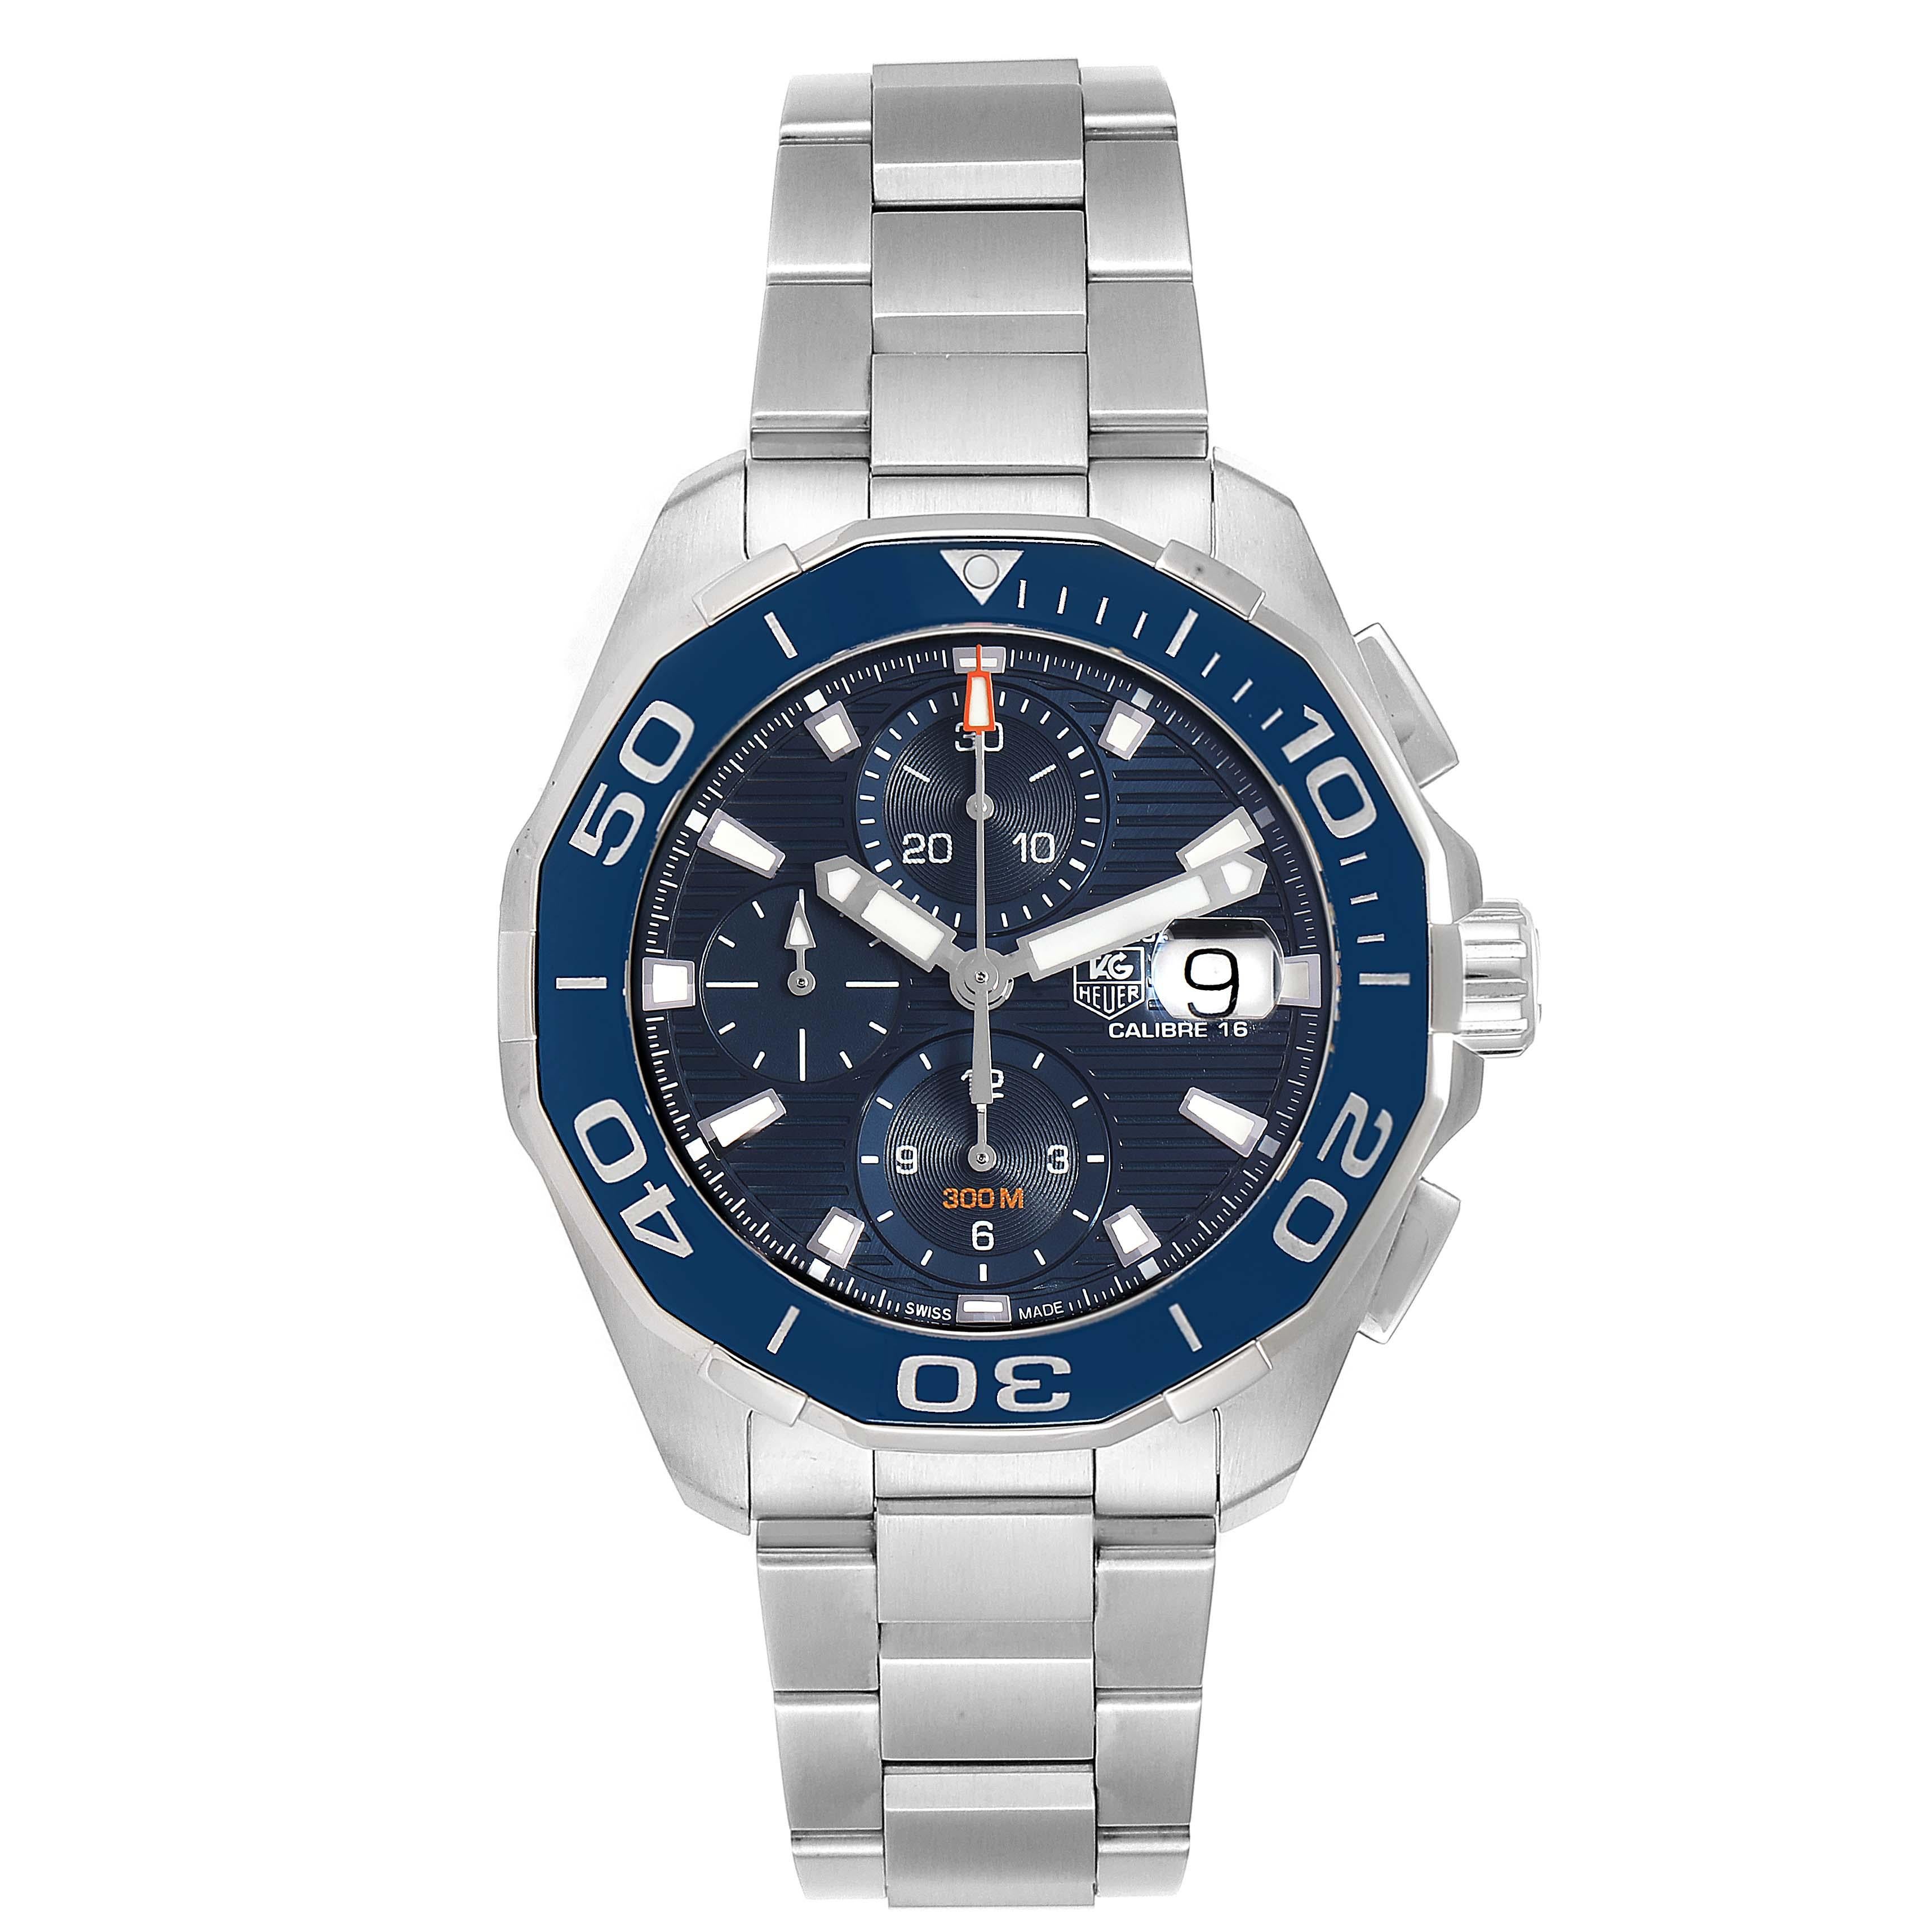 Tag Heuer Aquaracer Blue Dial Steel Mens Watch CAY211B Box Card. Automatic self-winding movement. Stainless steel case 43 mm in diameter. Case Thickness: 15 mm. Uni-directional rotating stainless steel bezel with a blue ceramic top ring. Scratch